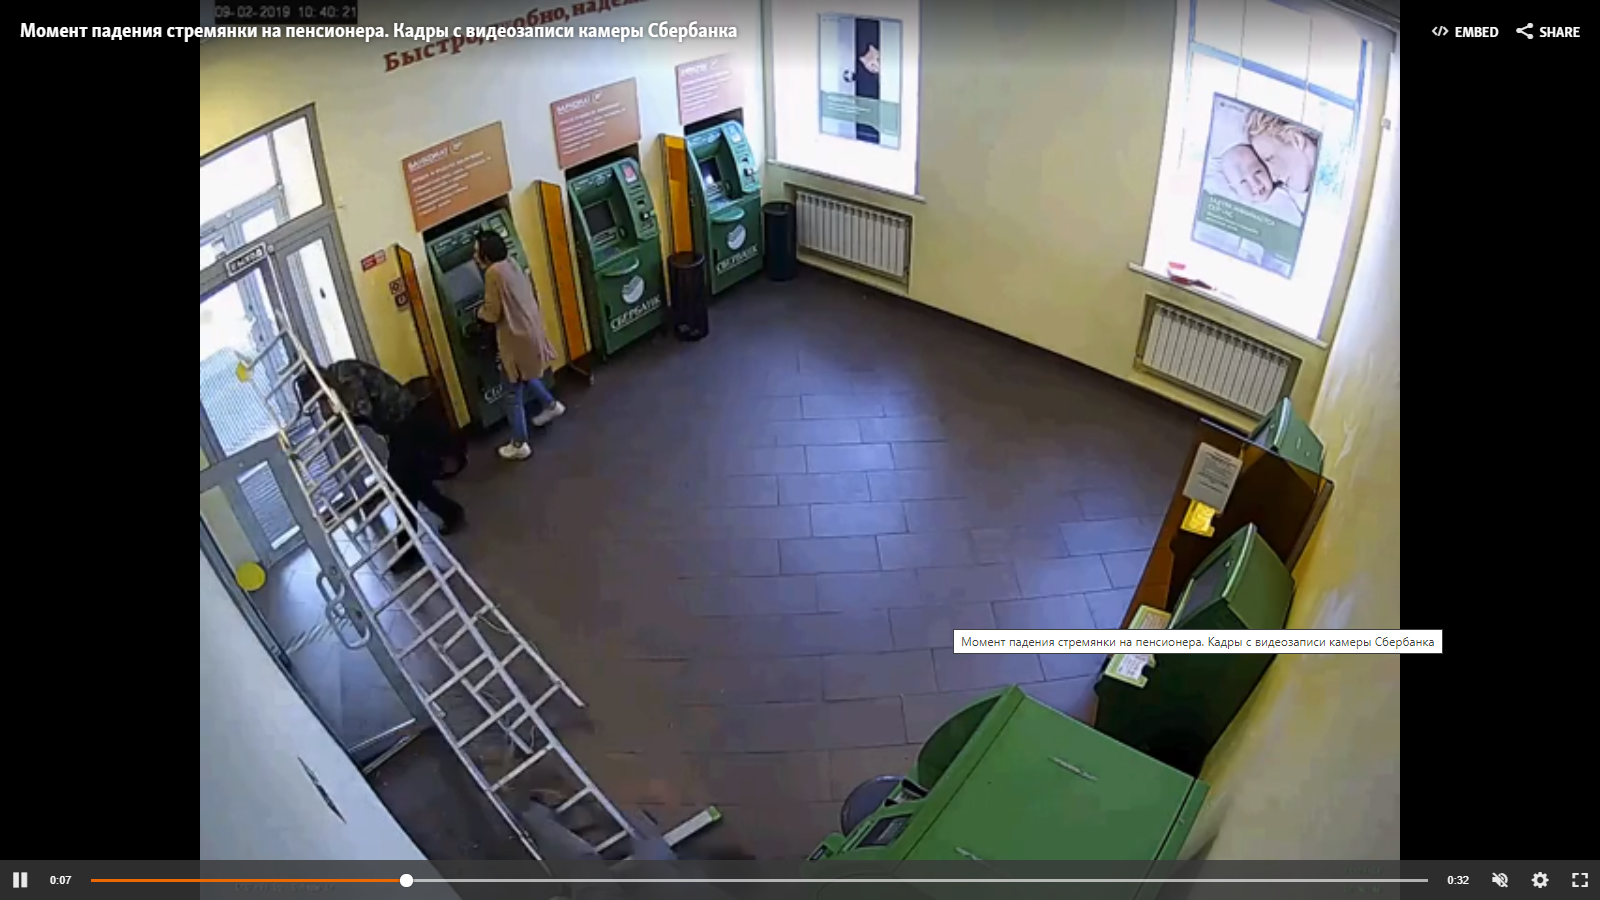 Greed forever: Sberbank does not compensate pensioner for damage from falling stairs